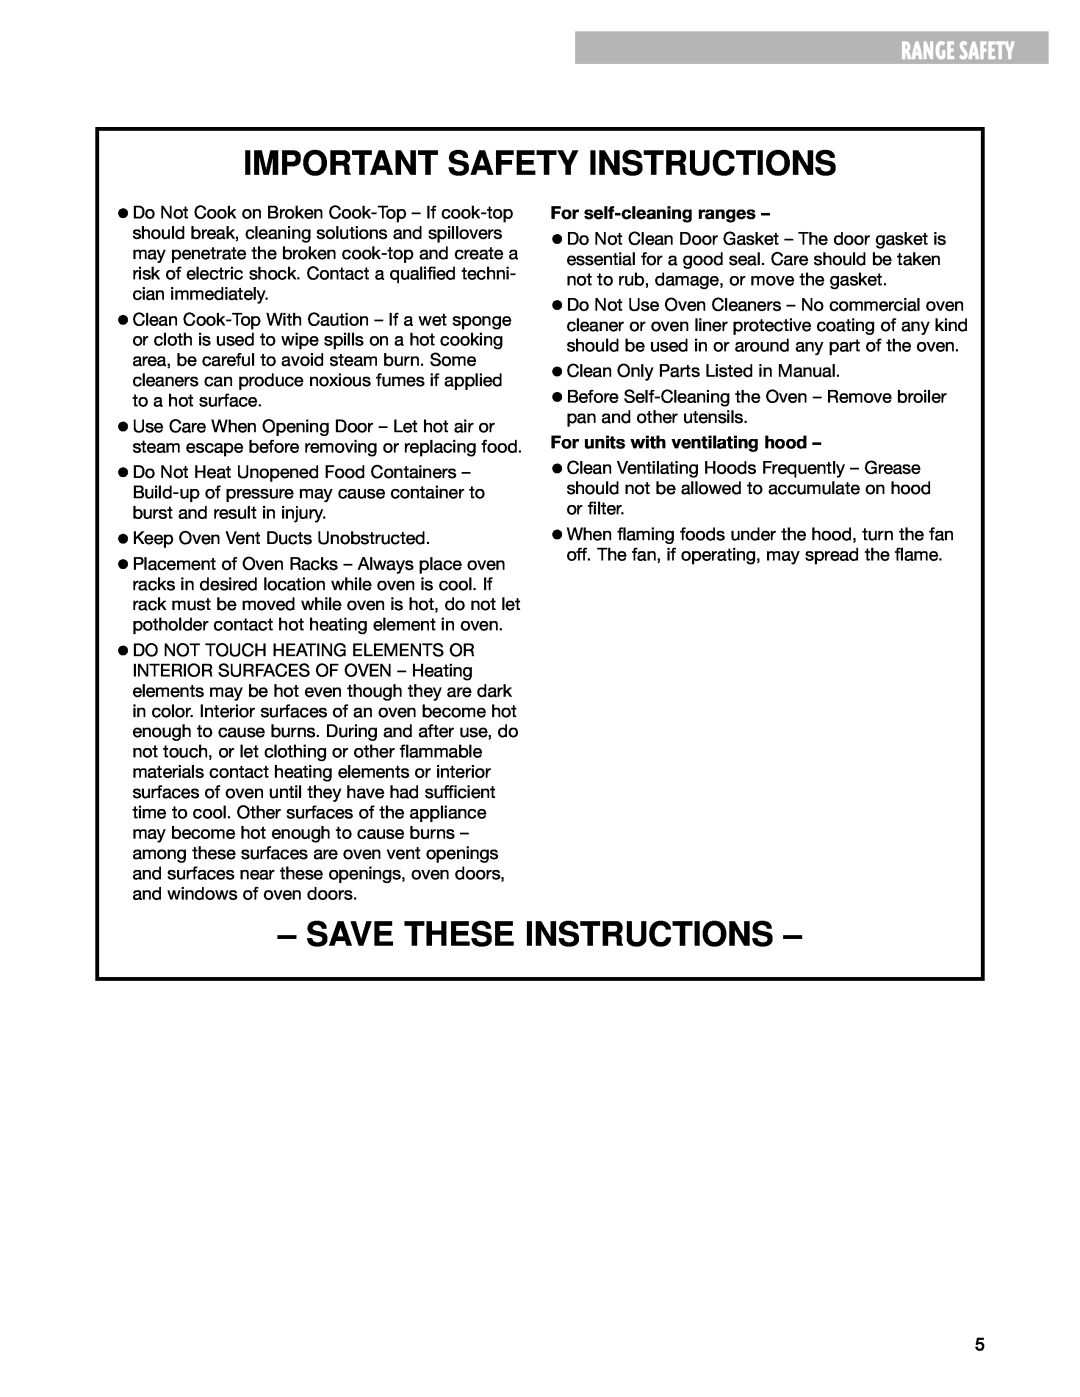 Whirlpool RF378PXG manual Important Safety Instructions, Save These Instructions, Range Safety, For self-cleaning ranges 